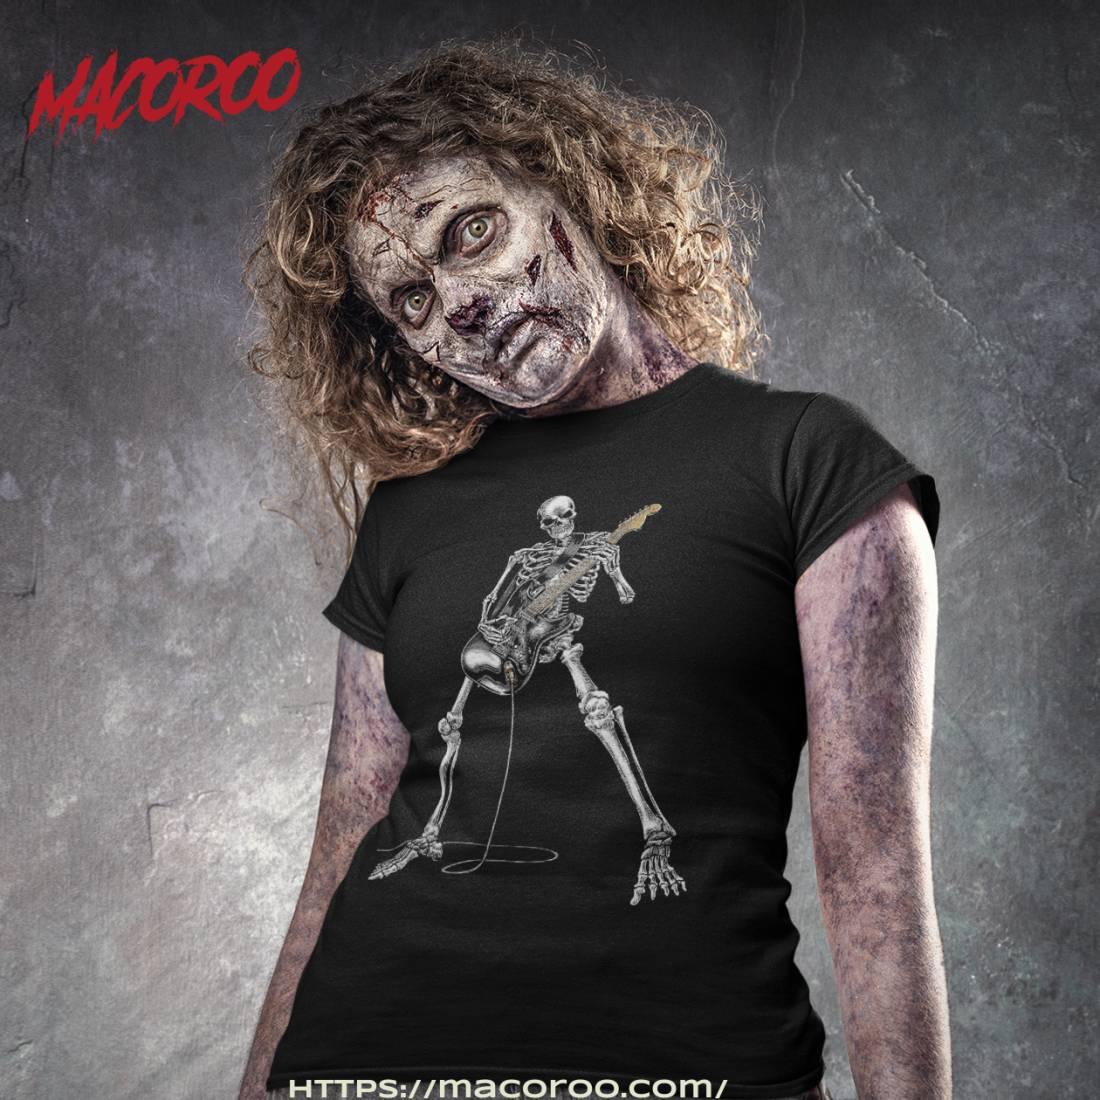 Rock and Roll Zombie, Women's T-Shirt Fitted